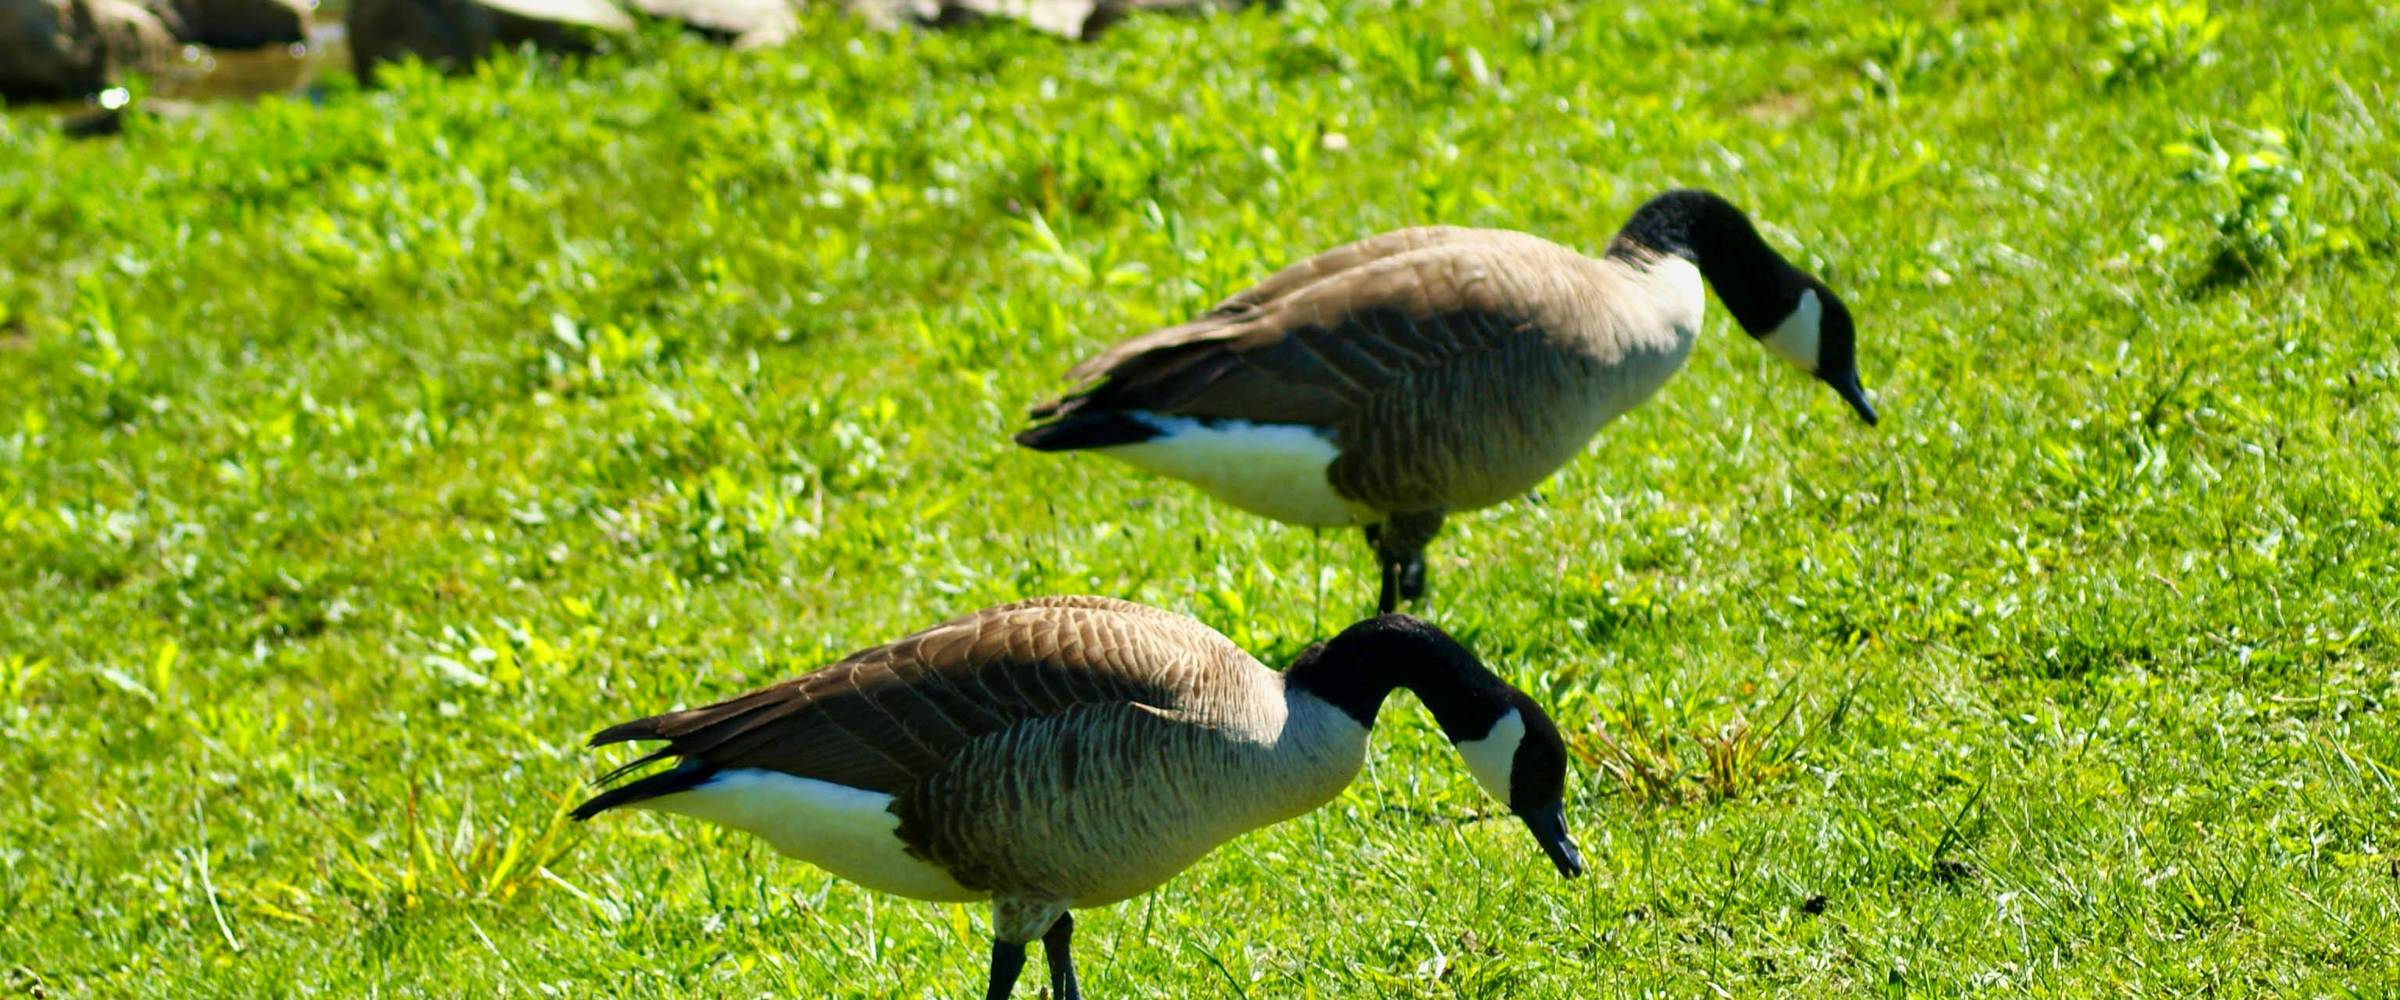 Canada geese Control & Deterrent Installations in New York